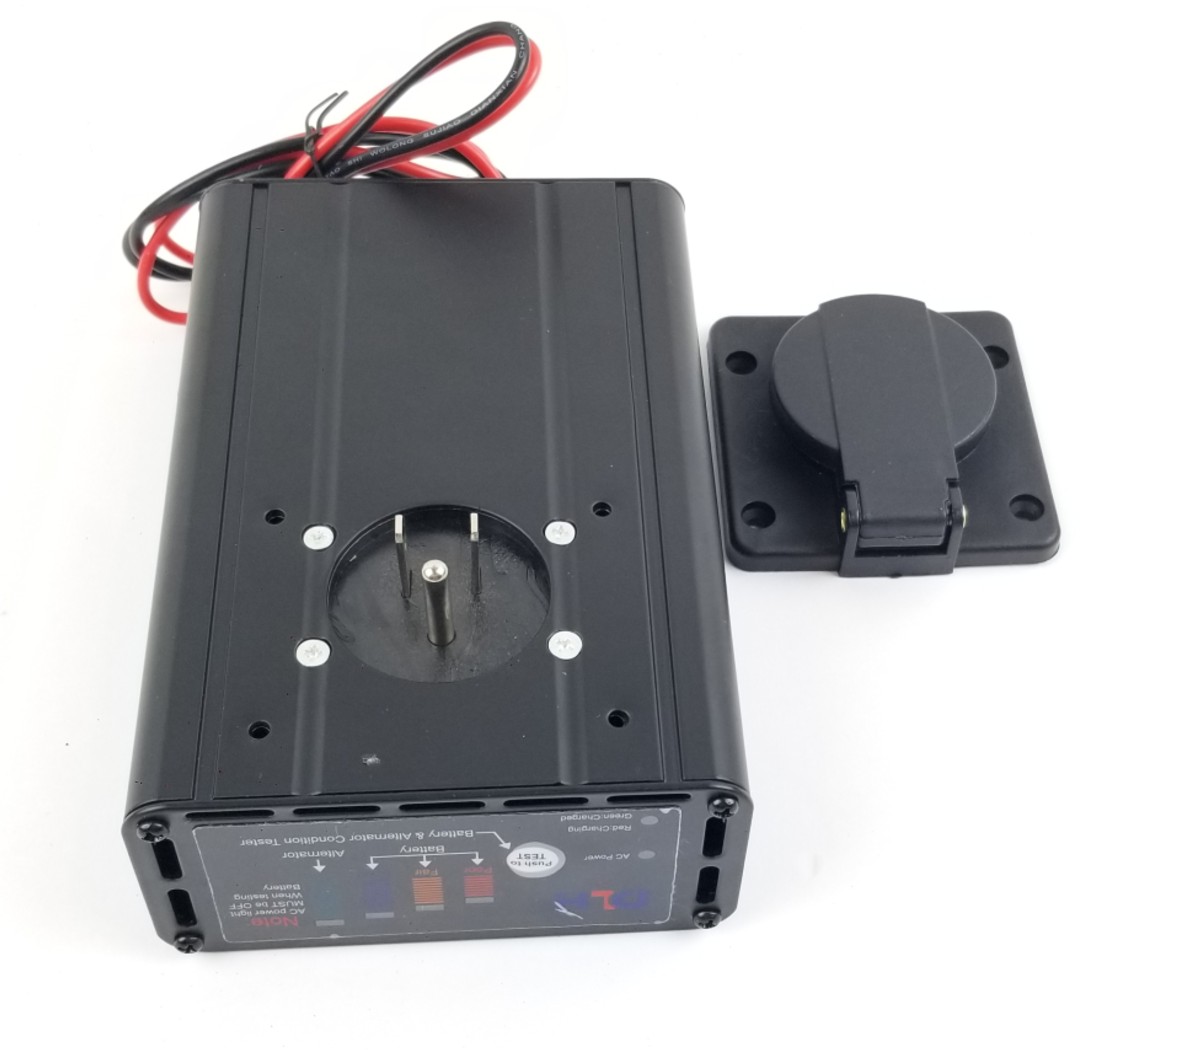 Load Trail 090195 Trailer Battery Charger 8 Amp 3 Step Charging System